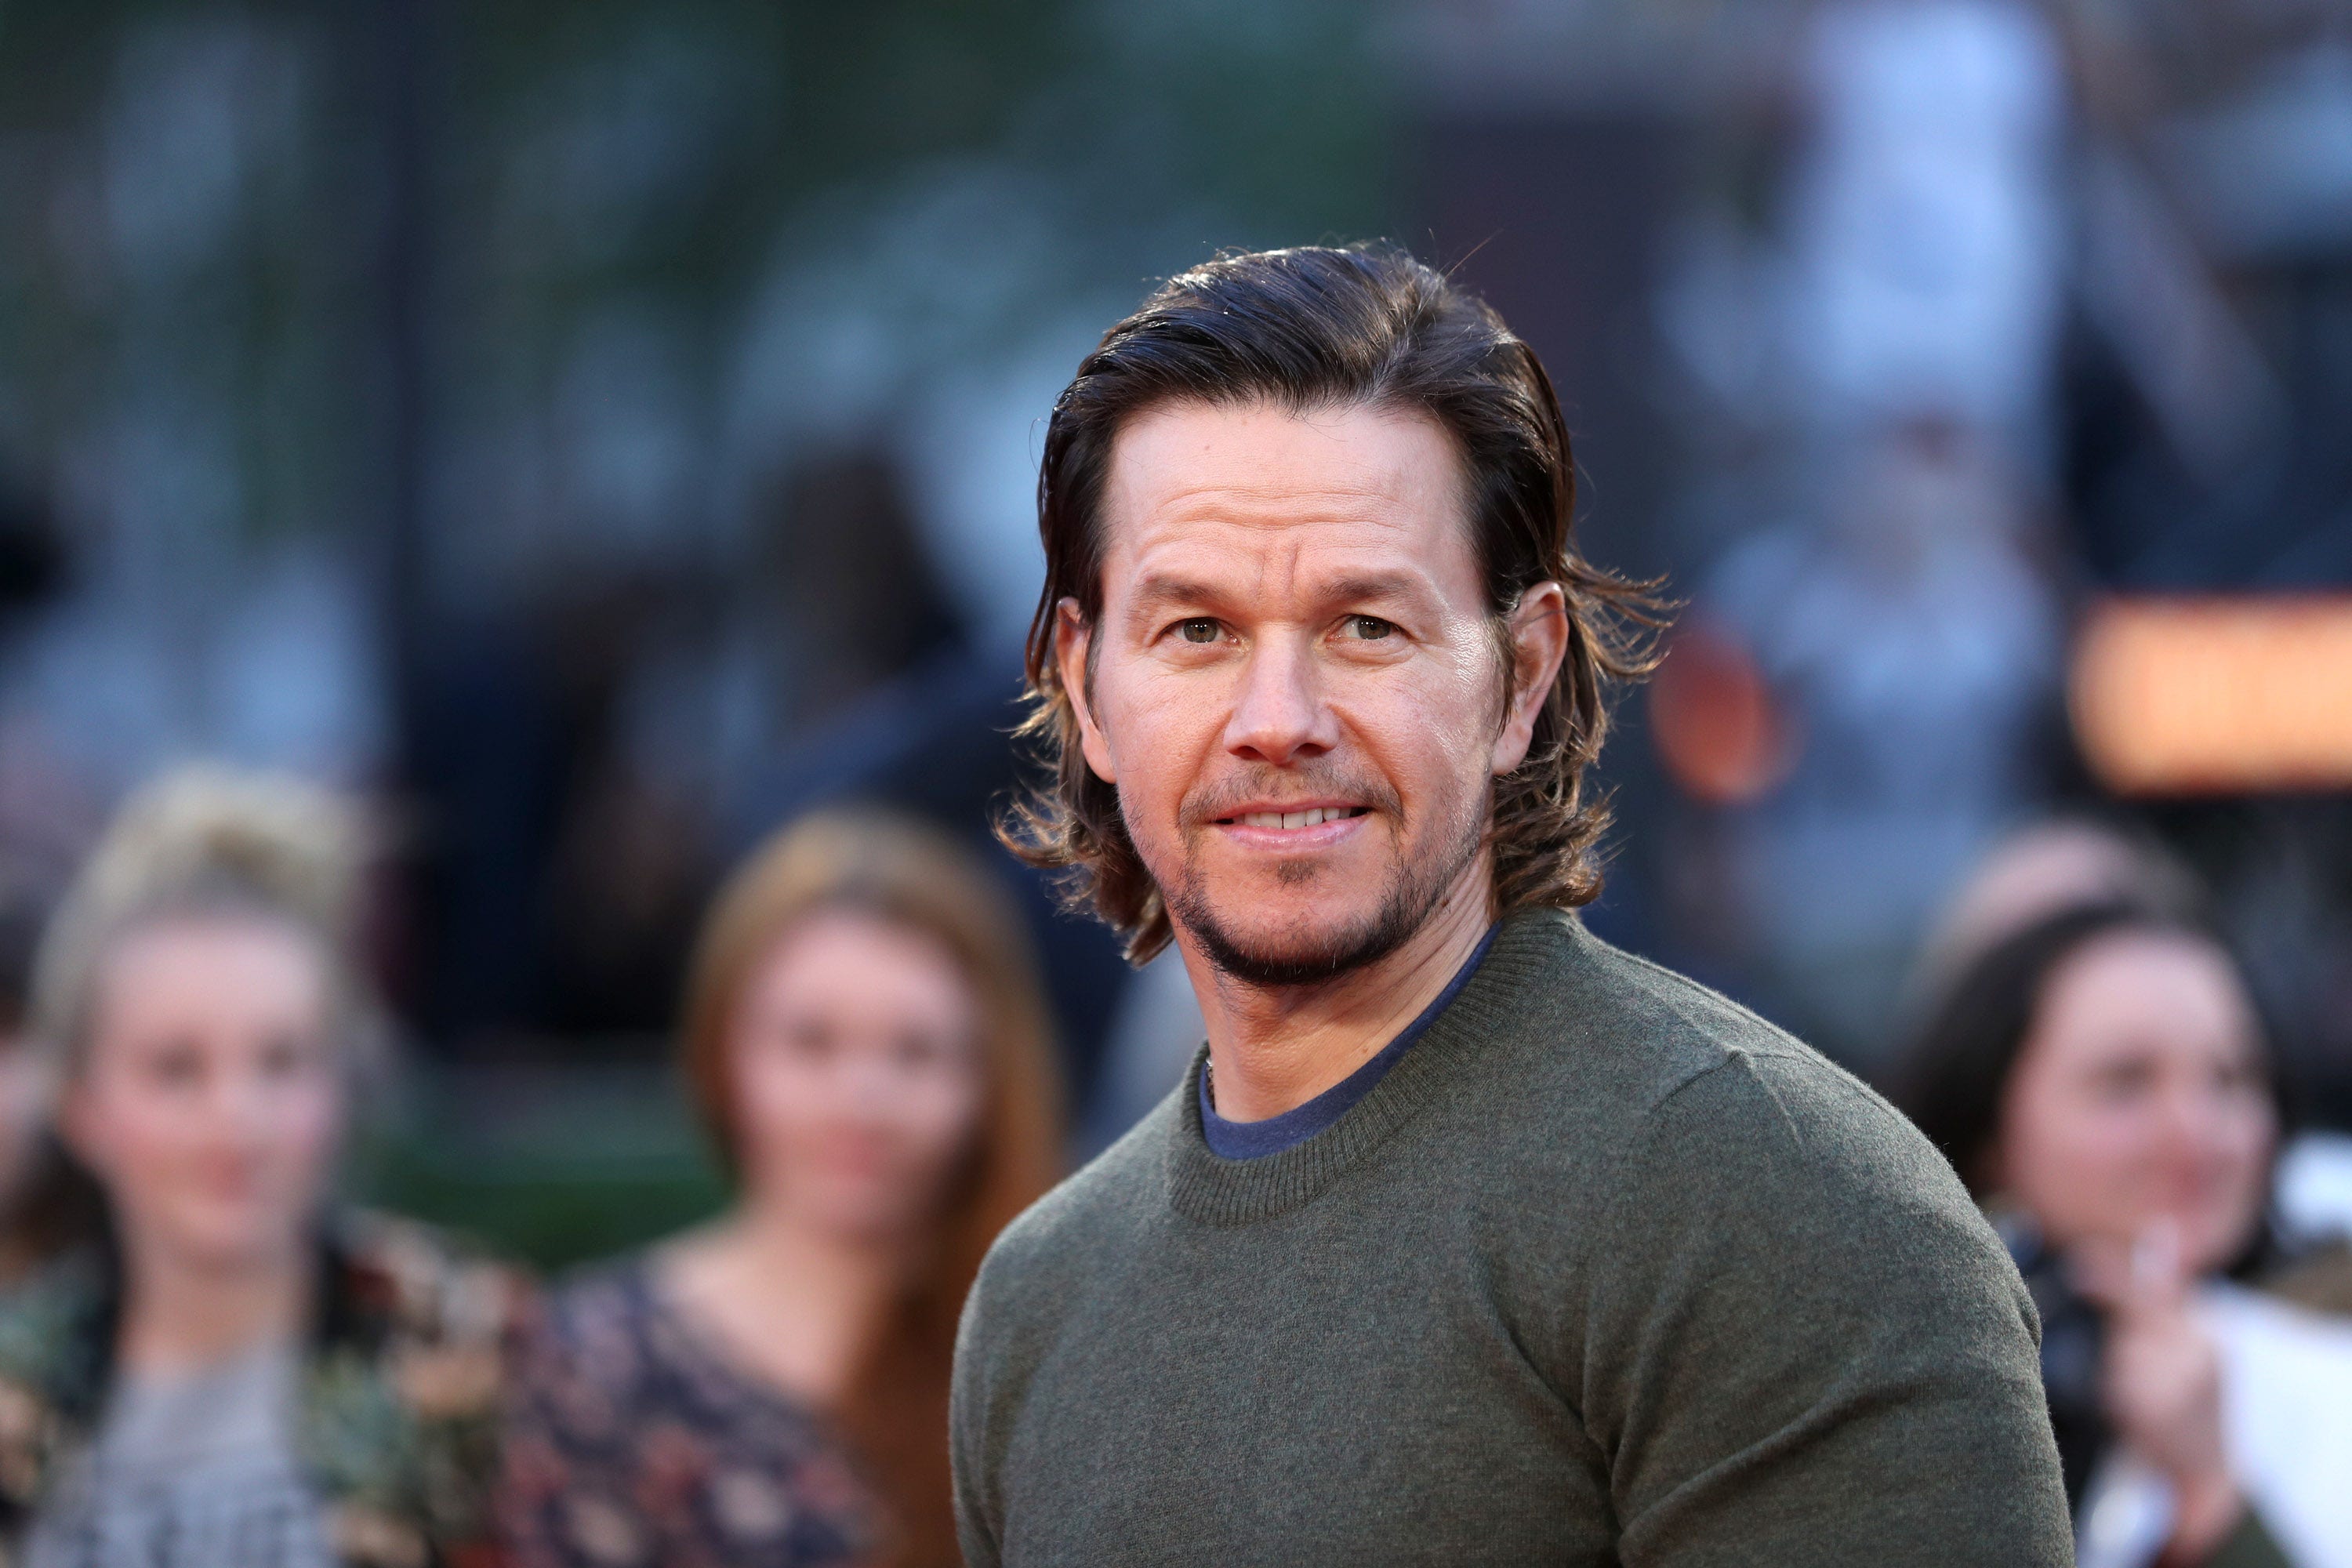 Mark Wahlberg reveals his thoughts on cancel culture: 'We all have our moments'